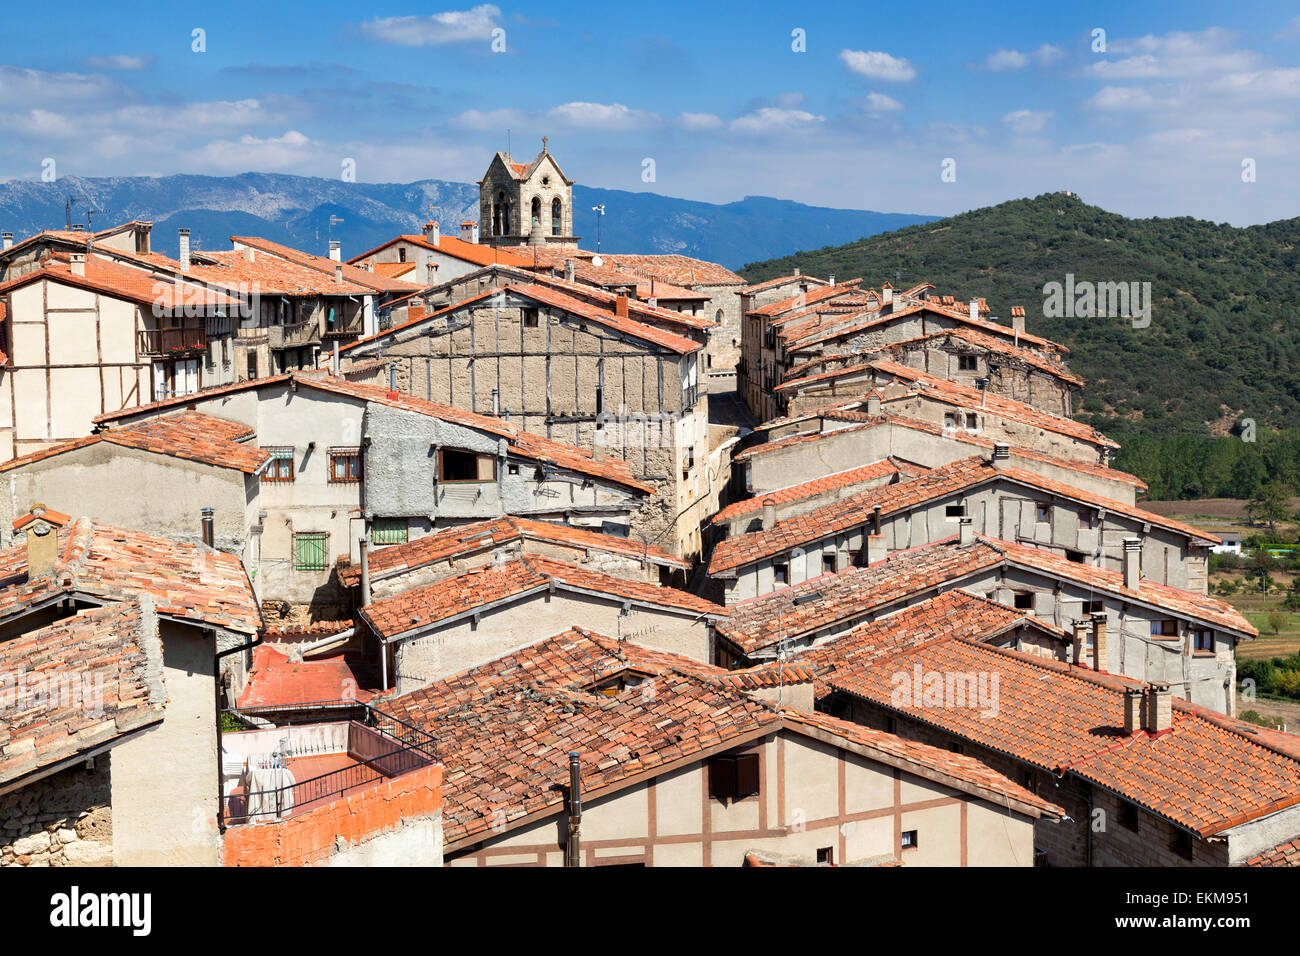 Panoramic view of an old medieval village called Frias, in Burgos, Spain Stock Photo